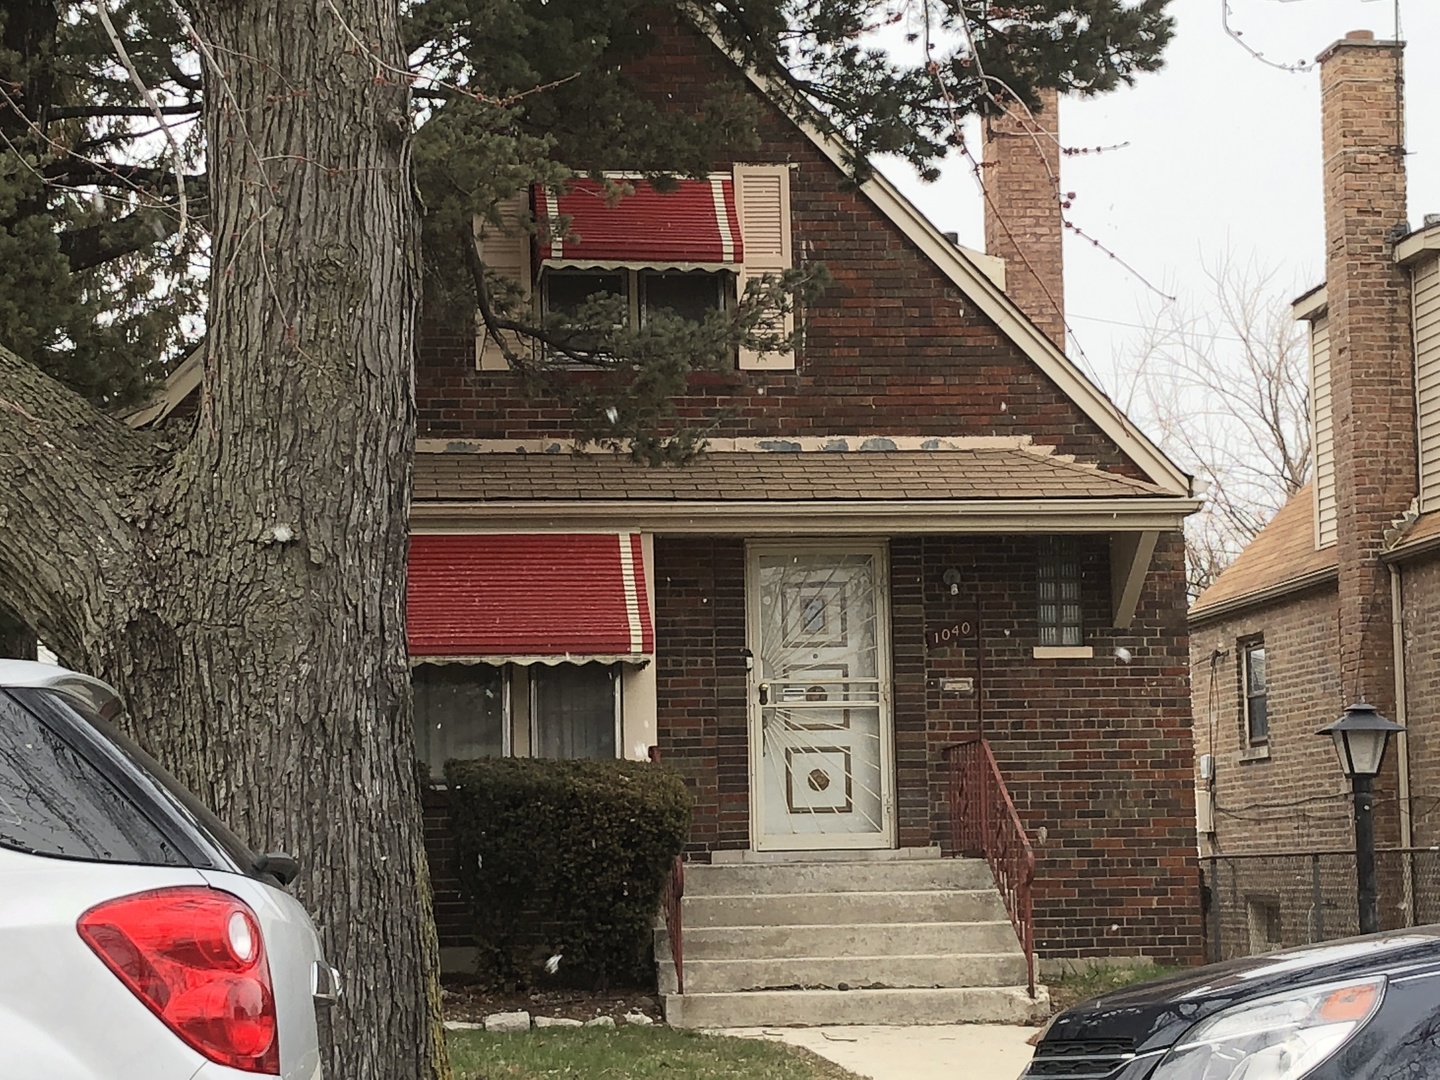 Photo of No Address Listed CHICAGO  60620